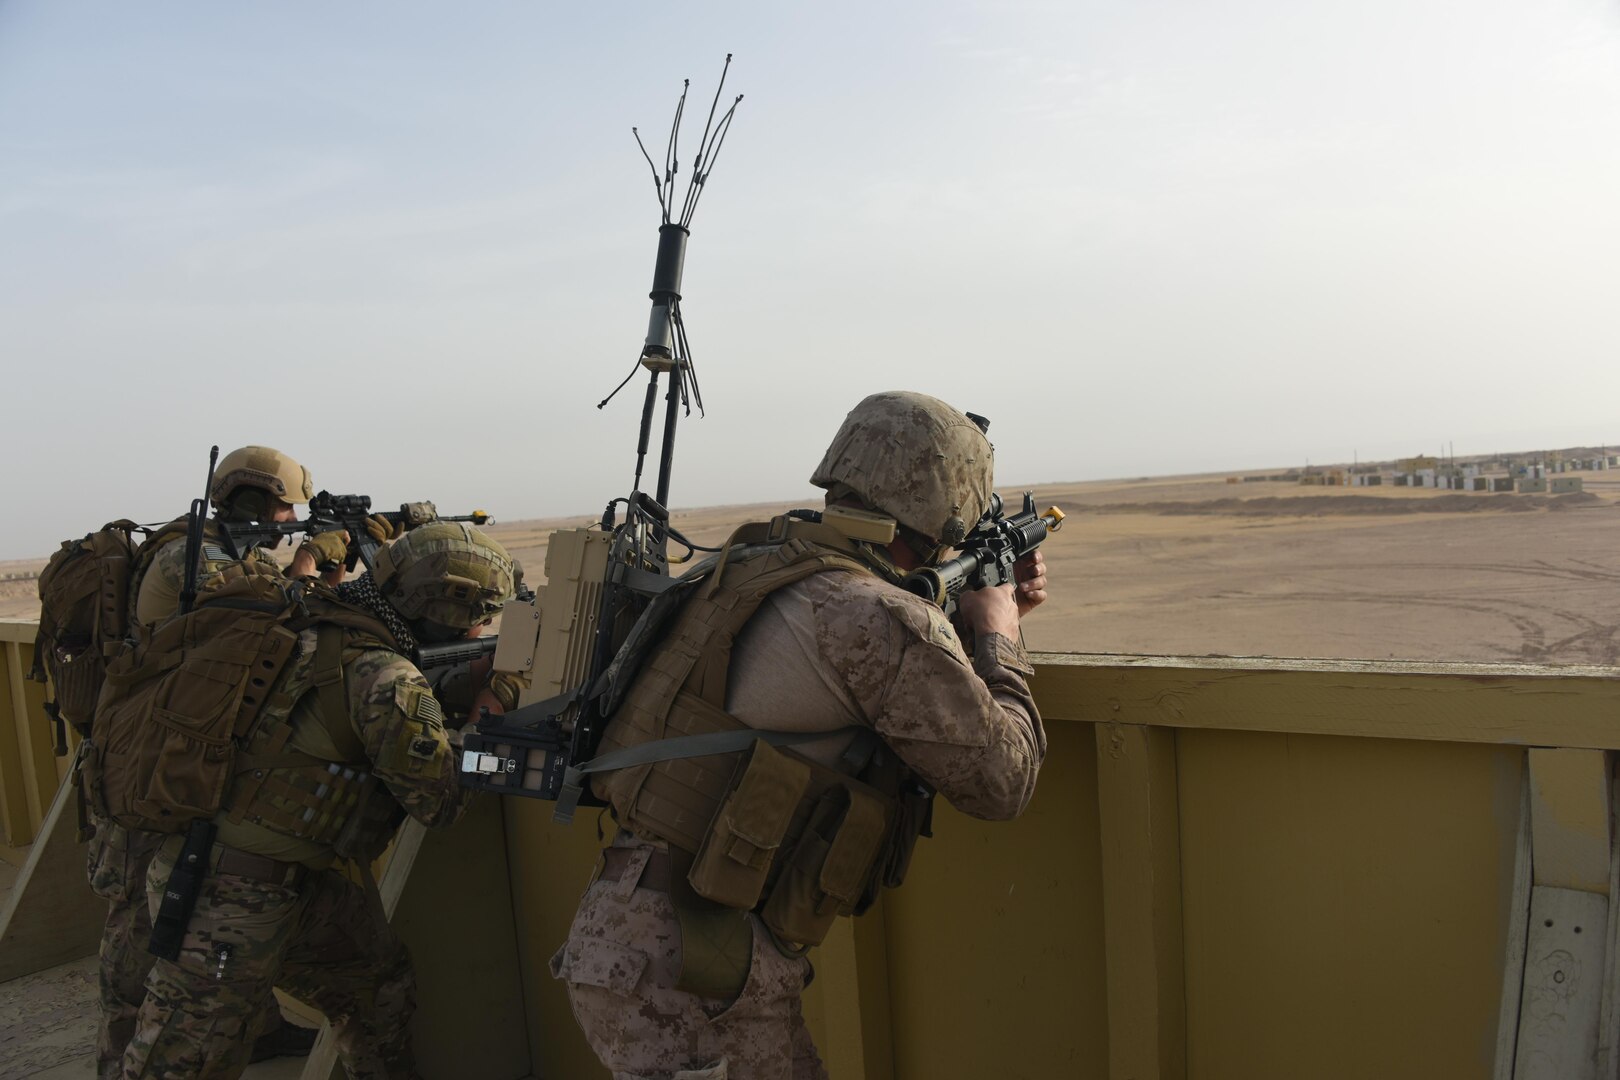 Air Force and Marine explosive ordnance disposal technicians work together to provide overwatch for advancing EOD teams during a joint service EOD field training exercise at an undisclosed location in Southwest Asia, May 25, 2017. EOD teams from each of the four service branches, deployed to five different countries across the AOR, gathered for joint service EOD training, which allowed for the exchange of tactics, techniques and procedures between service branches. (U.S. Air Force photo/Tech. Sgt. Jonathan Hehnly)